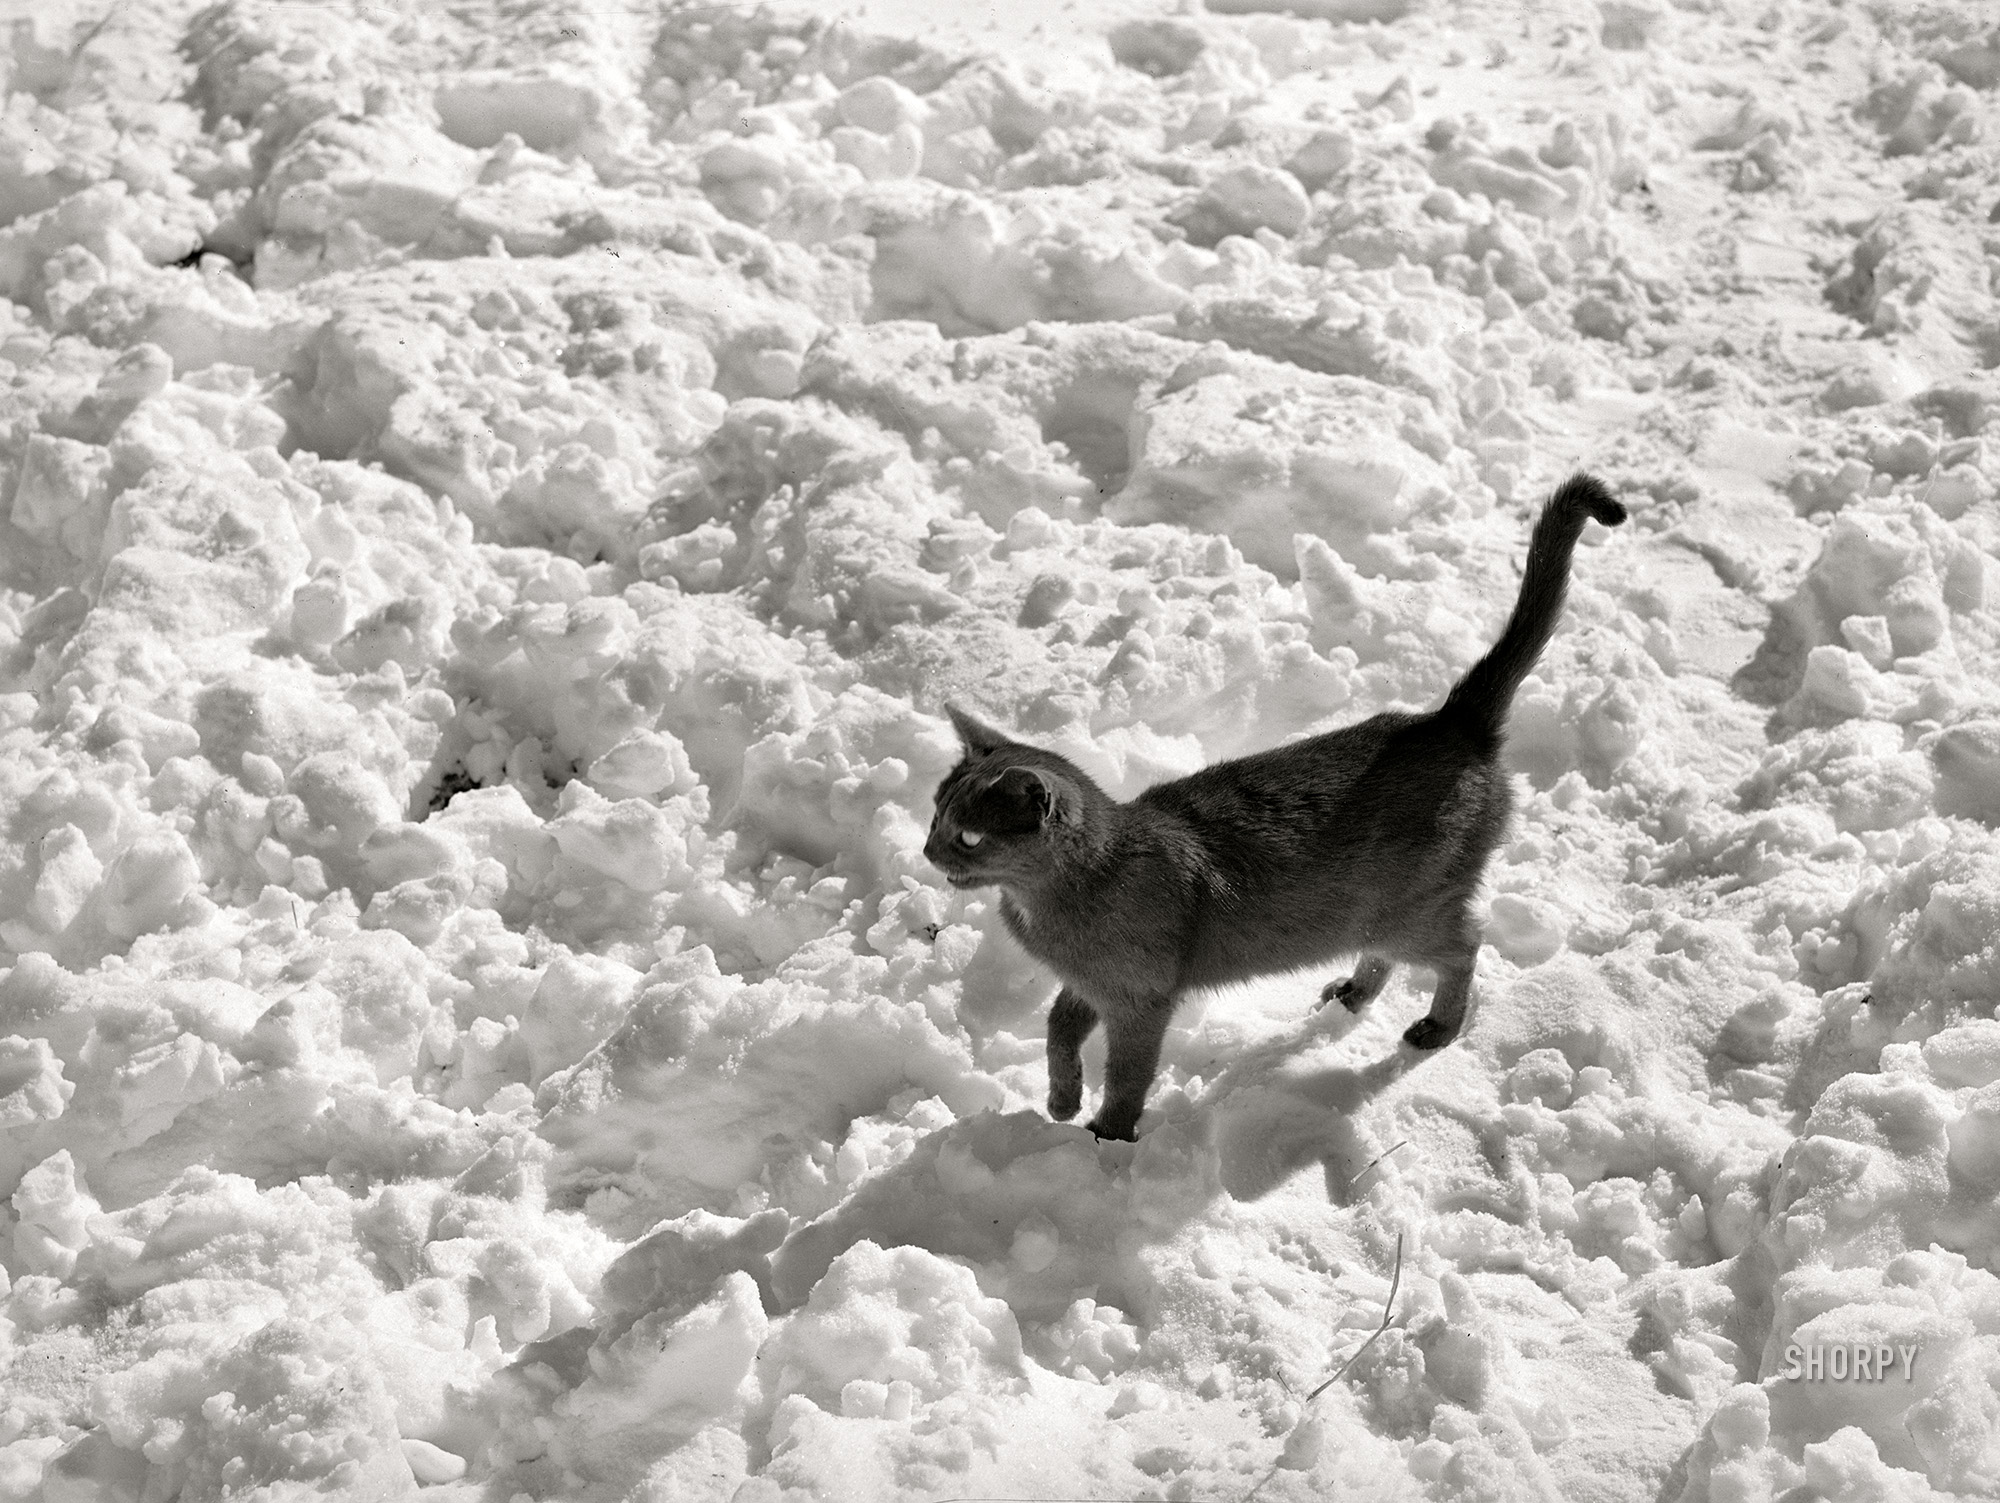 February 1940. "Black cat in snow. Ross County, Ohio." Medium format acetate negative by Arthur Rothstein for the Farm Security Administration. View full size.